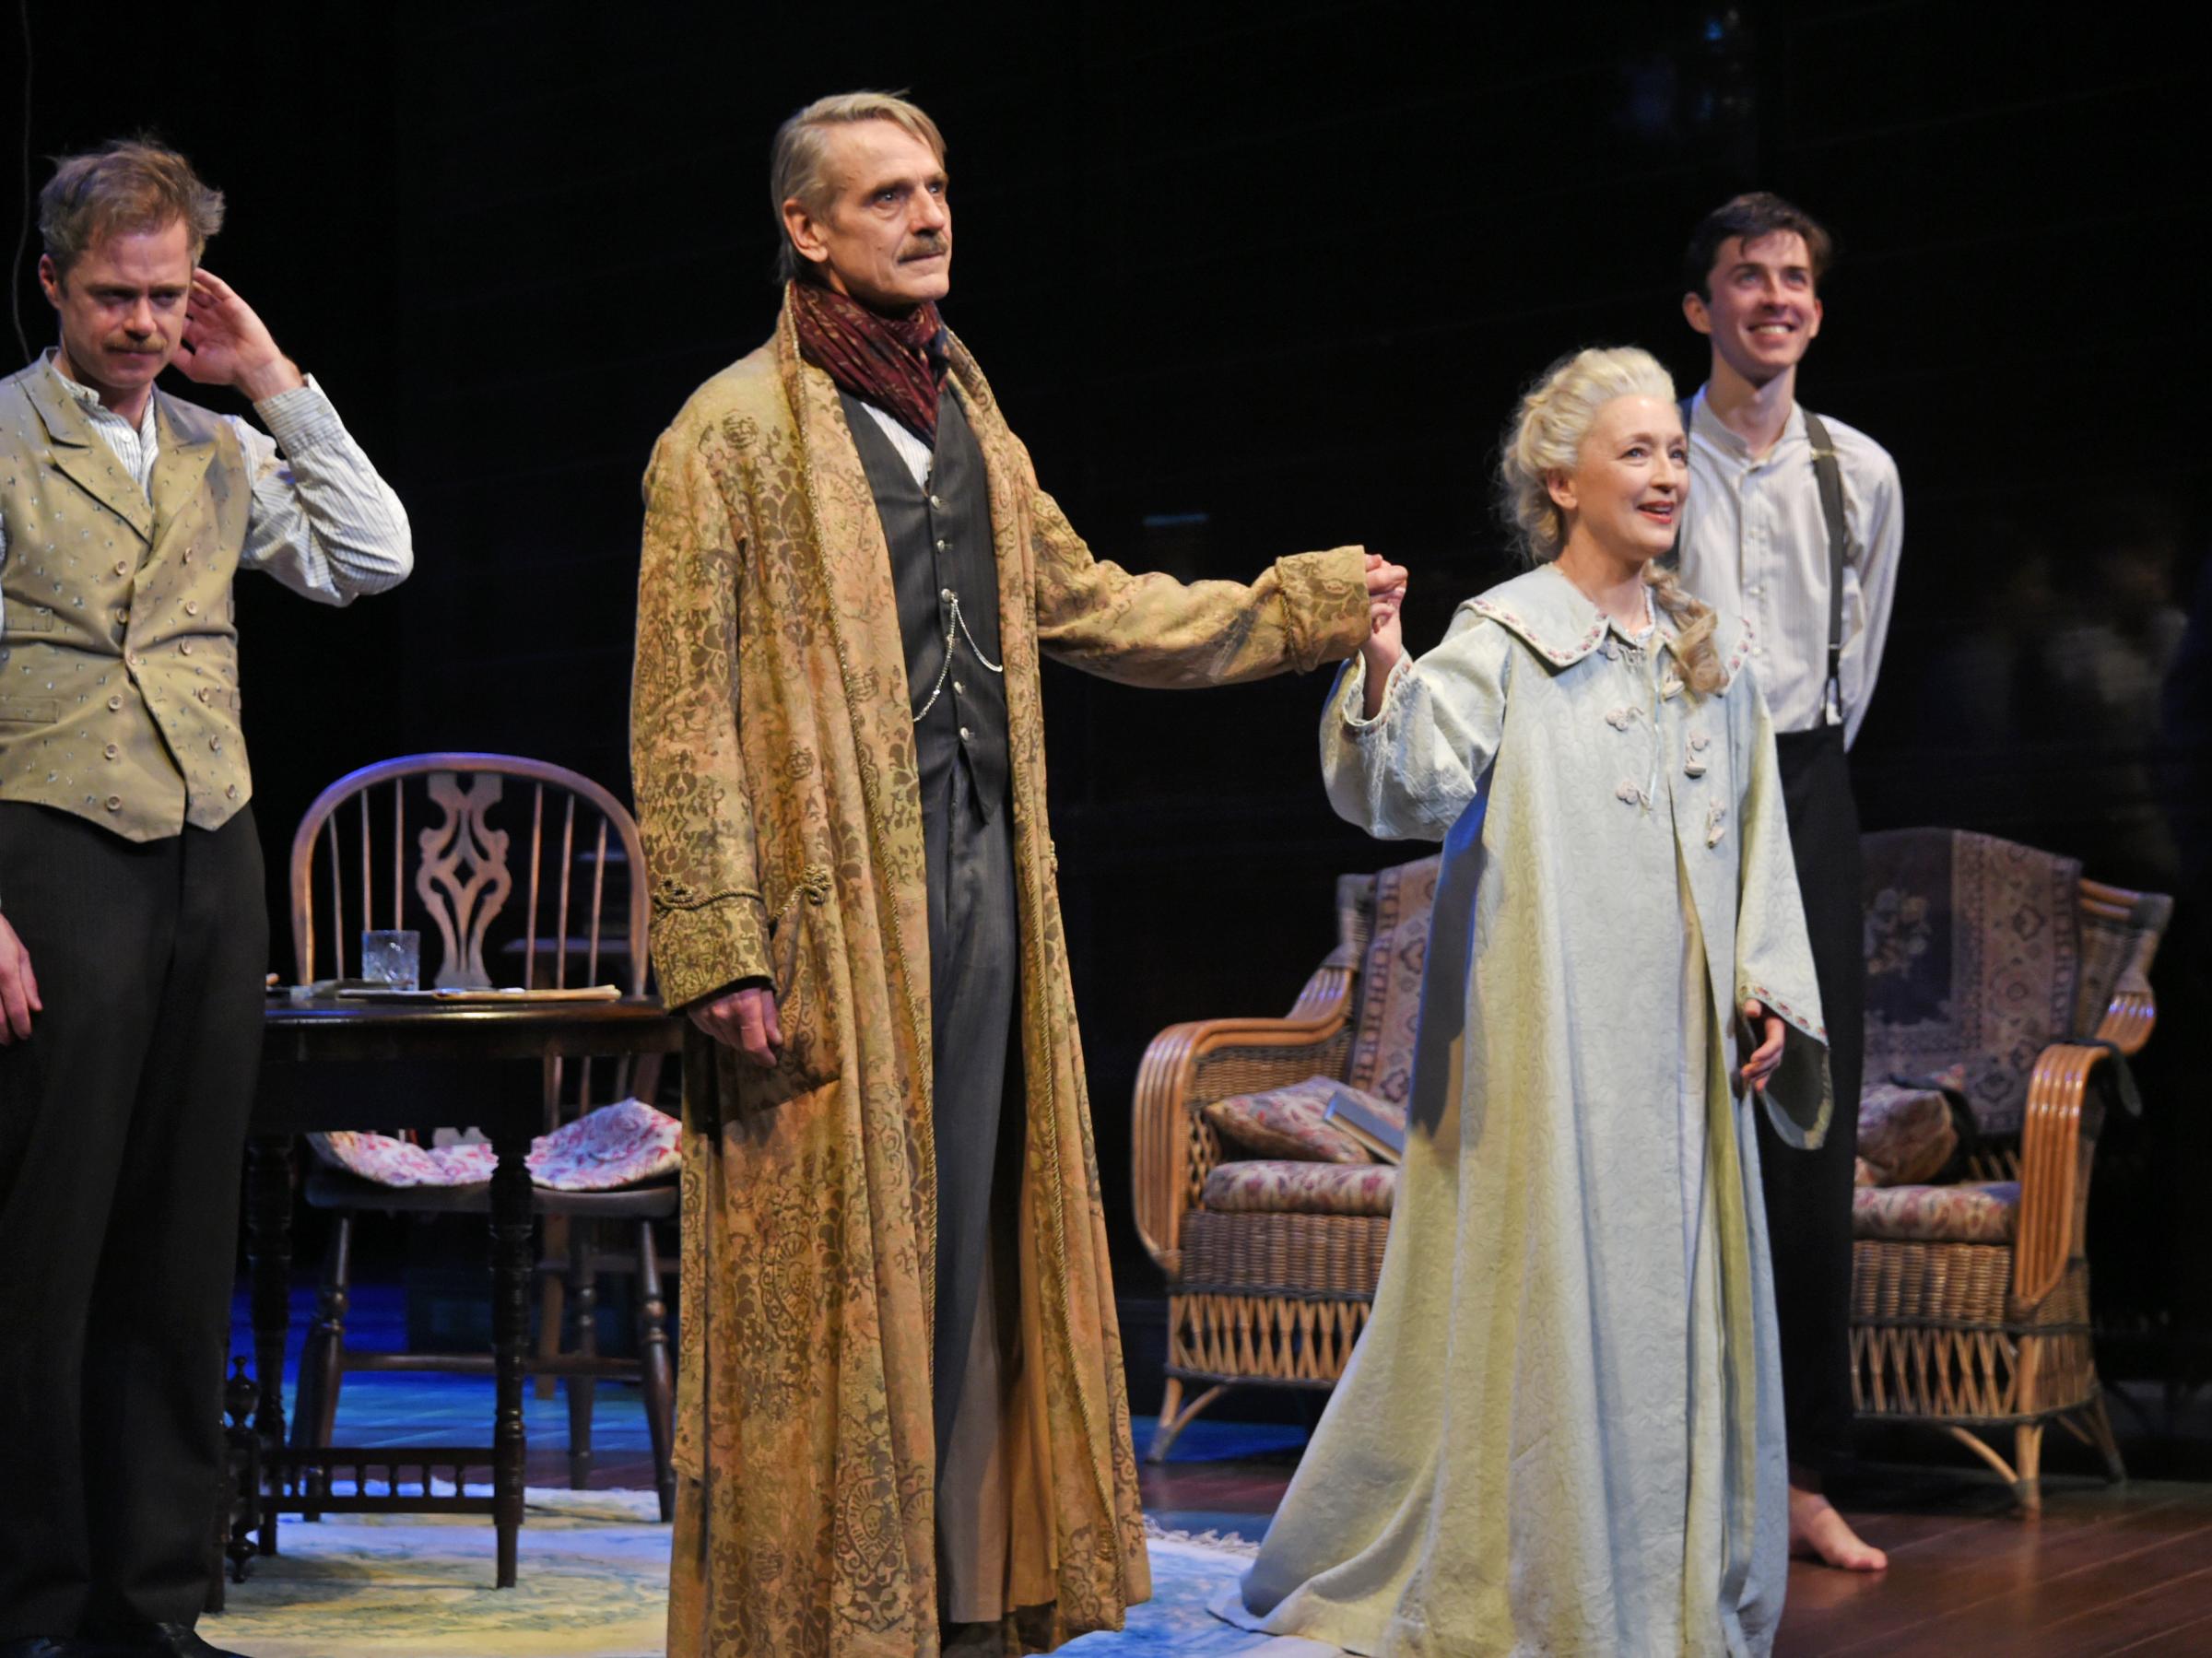 Cast members Rory Keenan, Jeremy Irons, Lesley Manville and Matthew Beard bow at the curtain call during the press night performance of "Long Day's Journey Into Night" on February 6, 2018 in London, England.